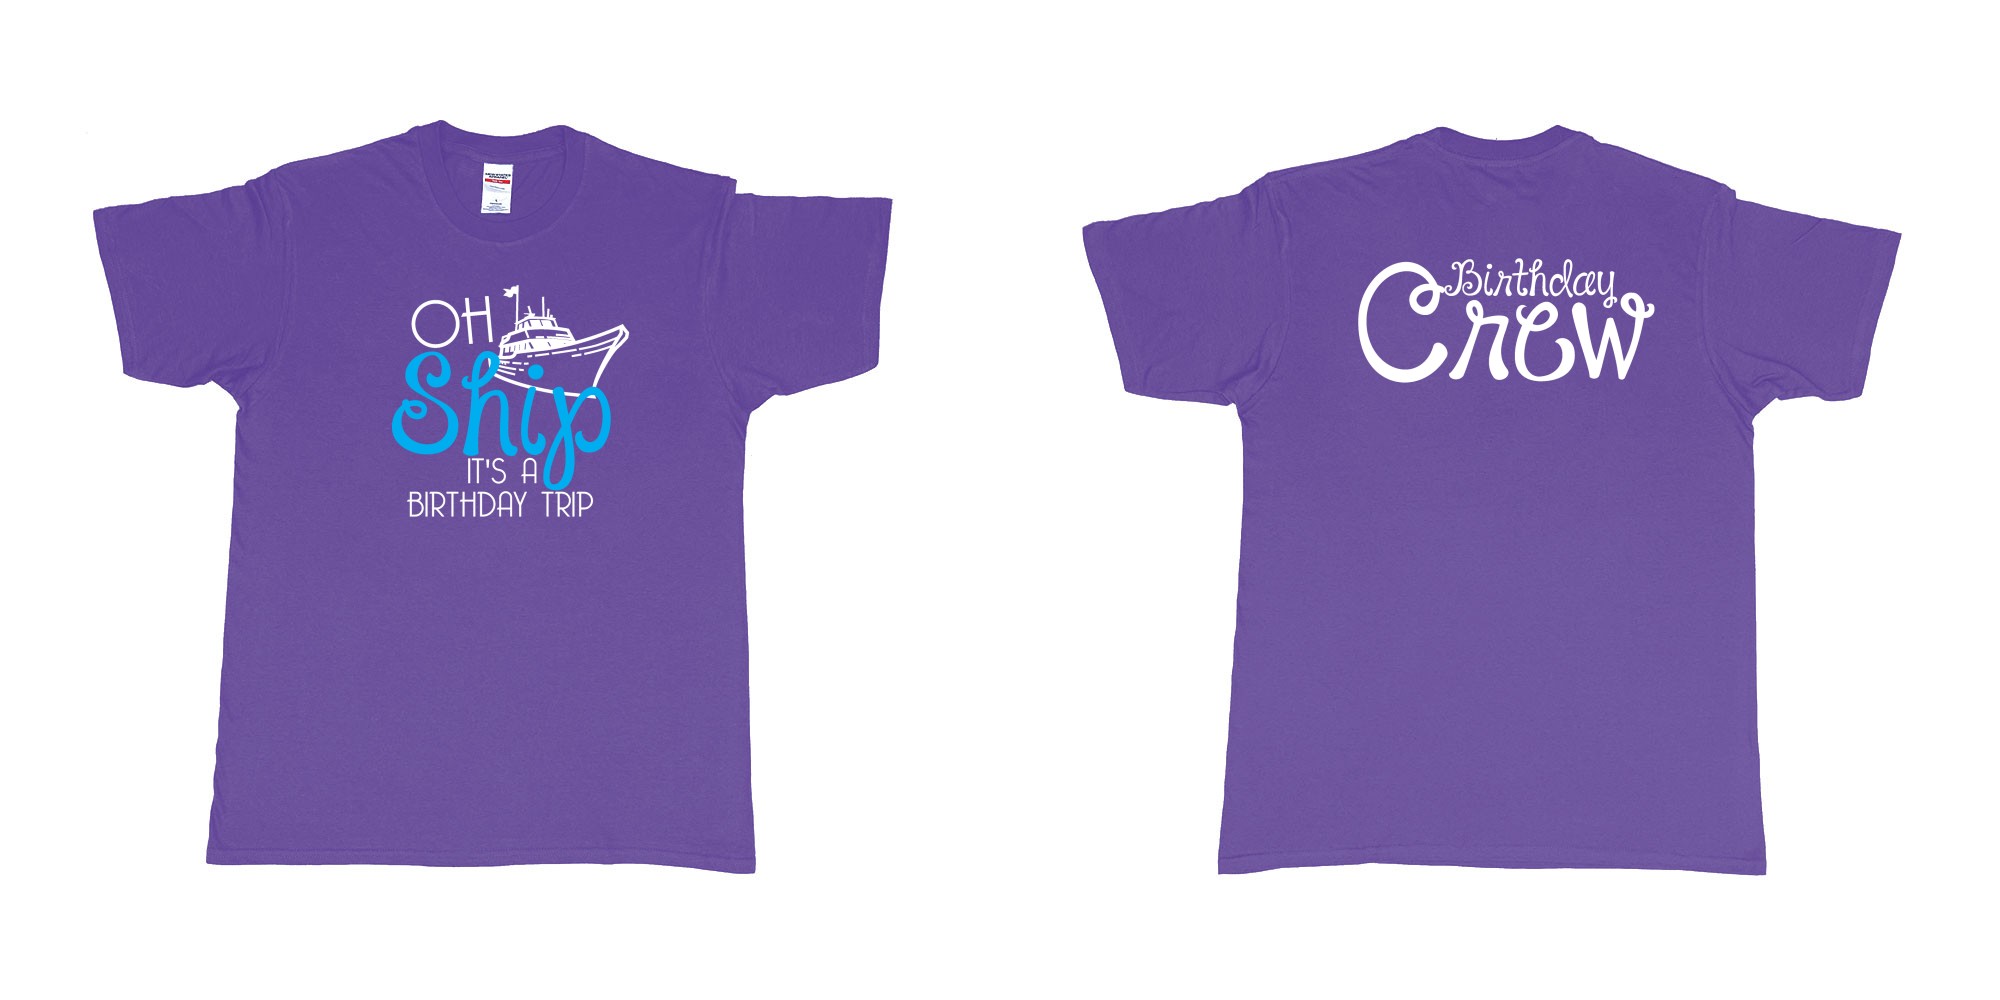 Custom tshirt design Birthday Oh Ship in fabric color purple choice your own text made in Bali by The Pirate Way